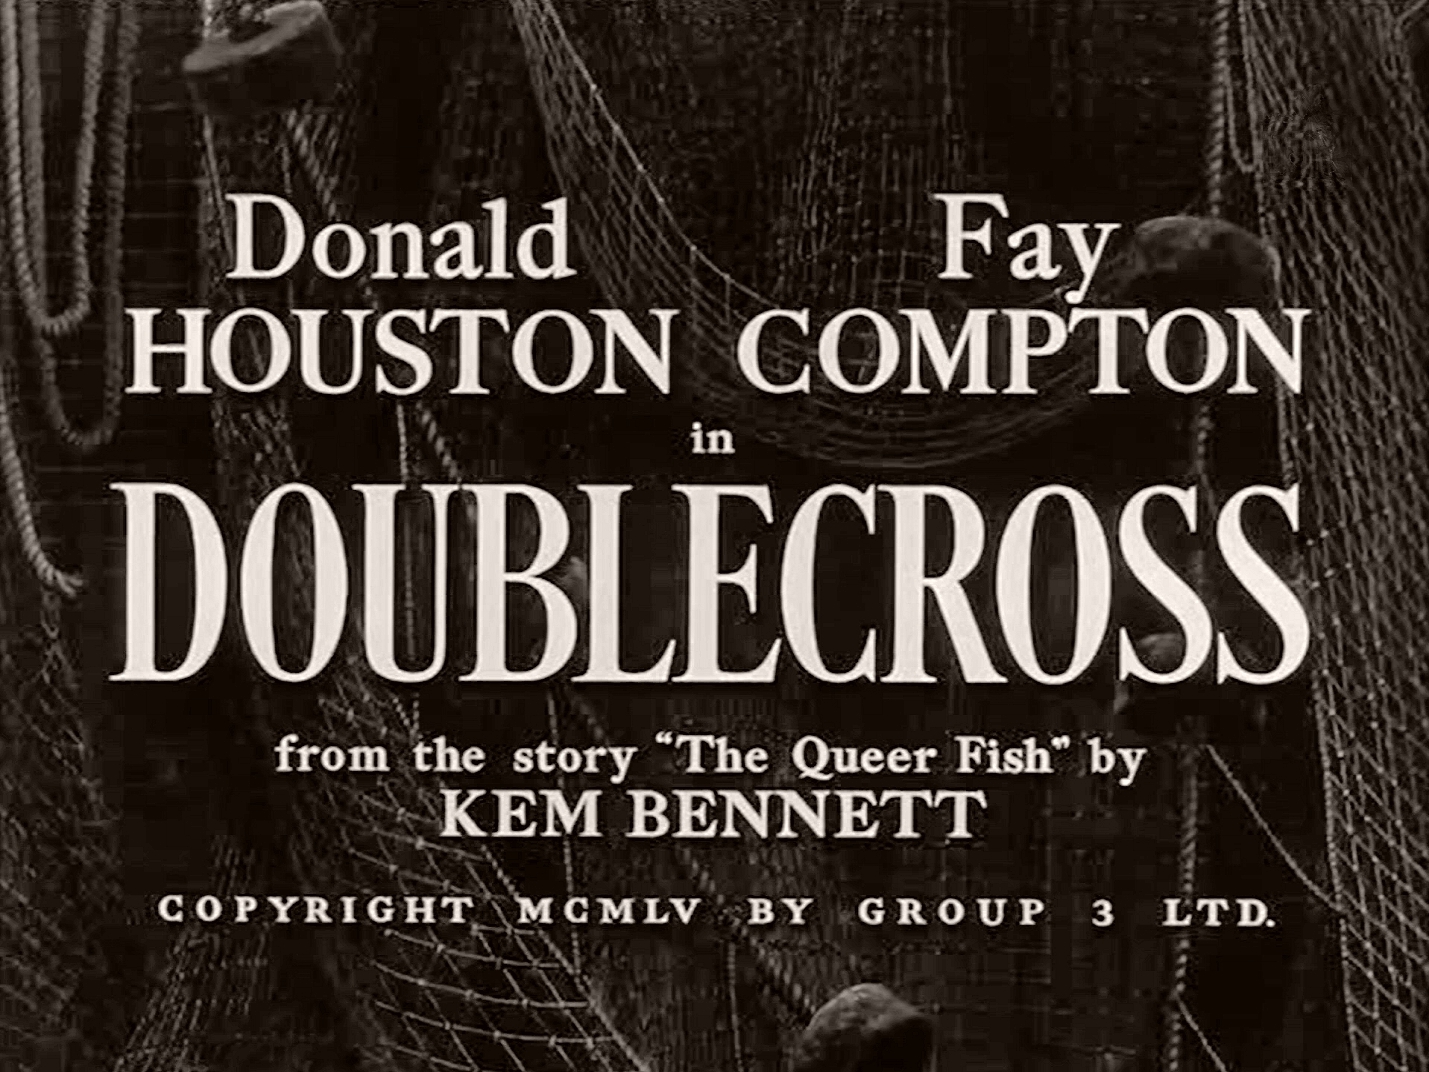 Main title from Doublecross (1956) (3). Donald Houston Fay Compton in Doublecross from the story ‘The Queer Fish’ by Kem Bennett. Copyright MCMLV by Group 3 Ltd